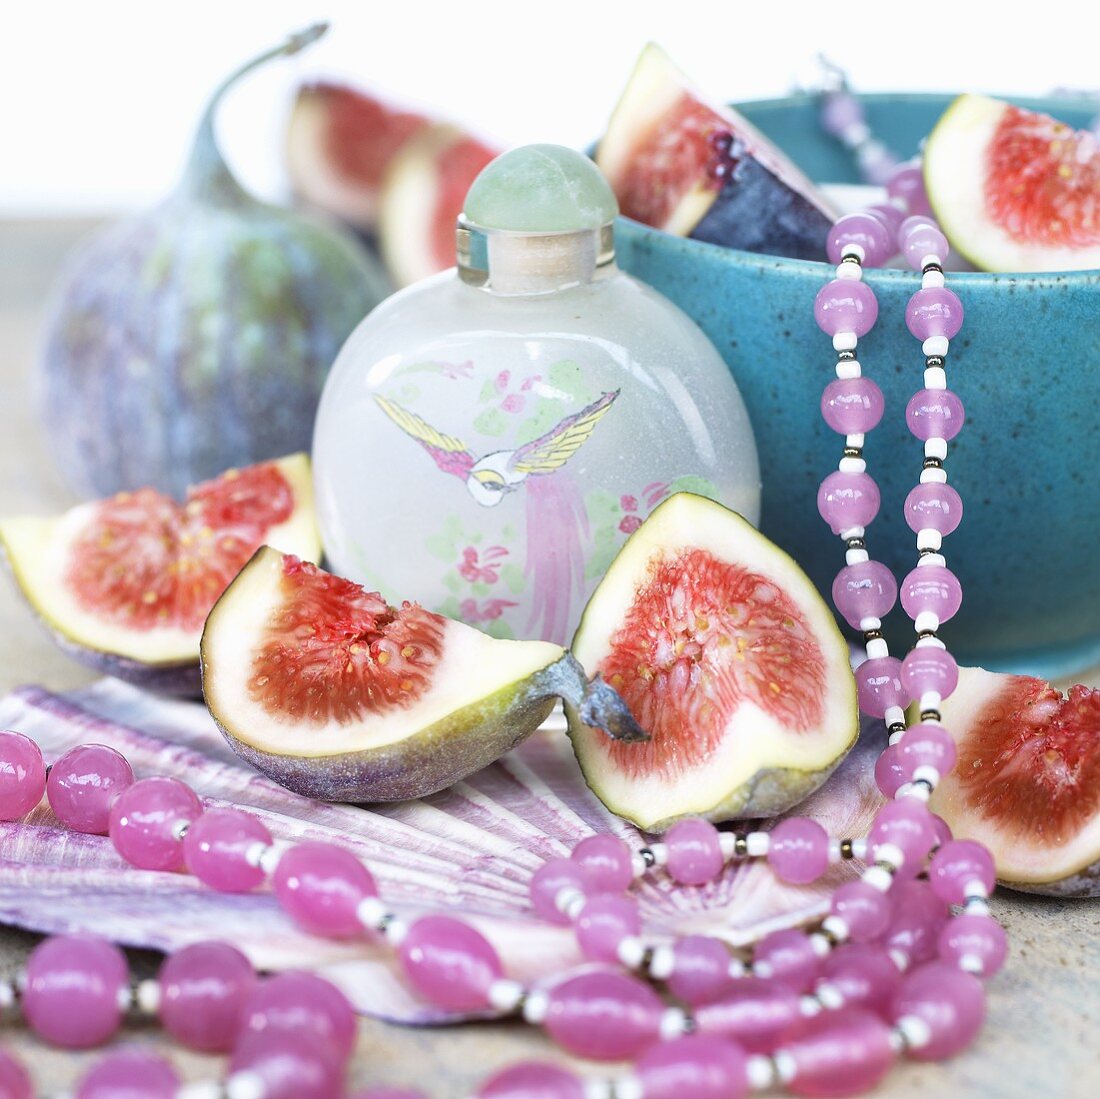 Figs, cosmetic product and string of beads